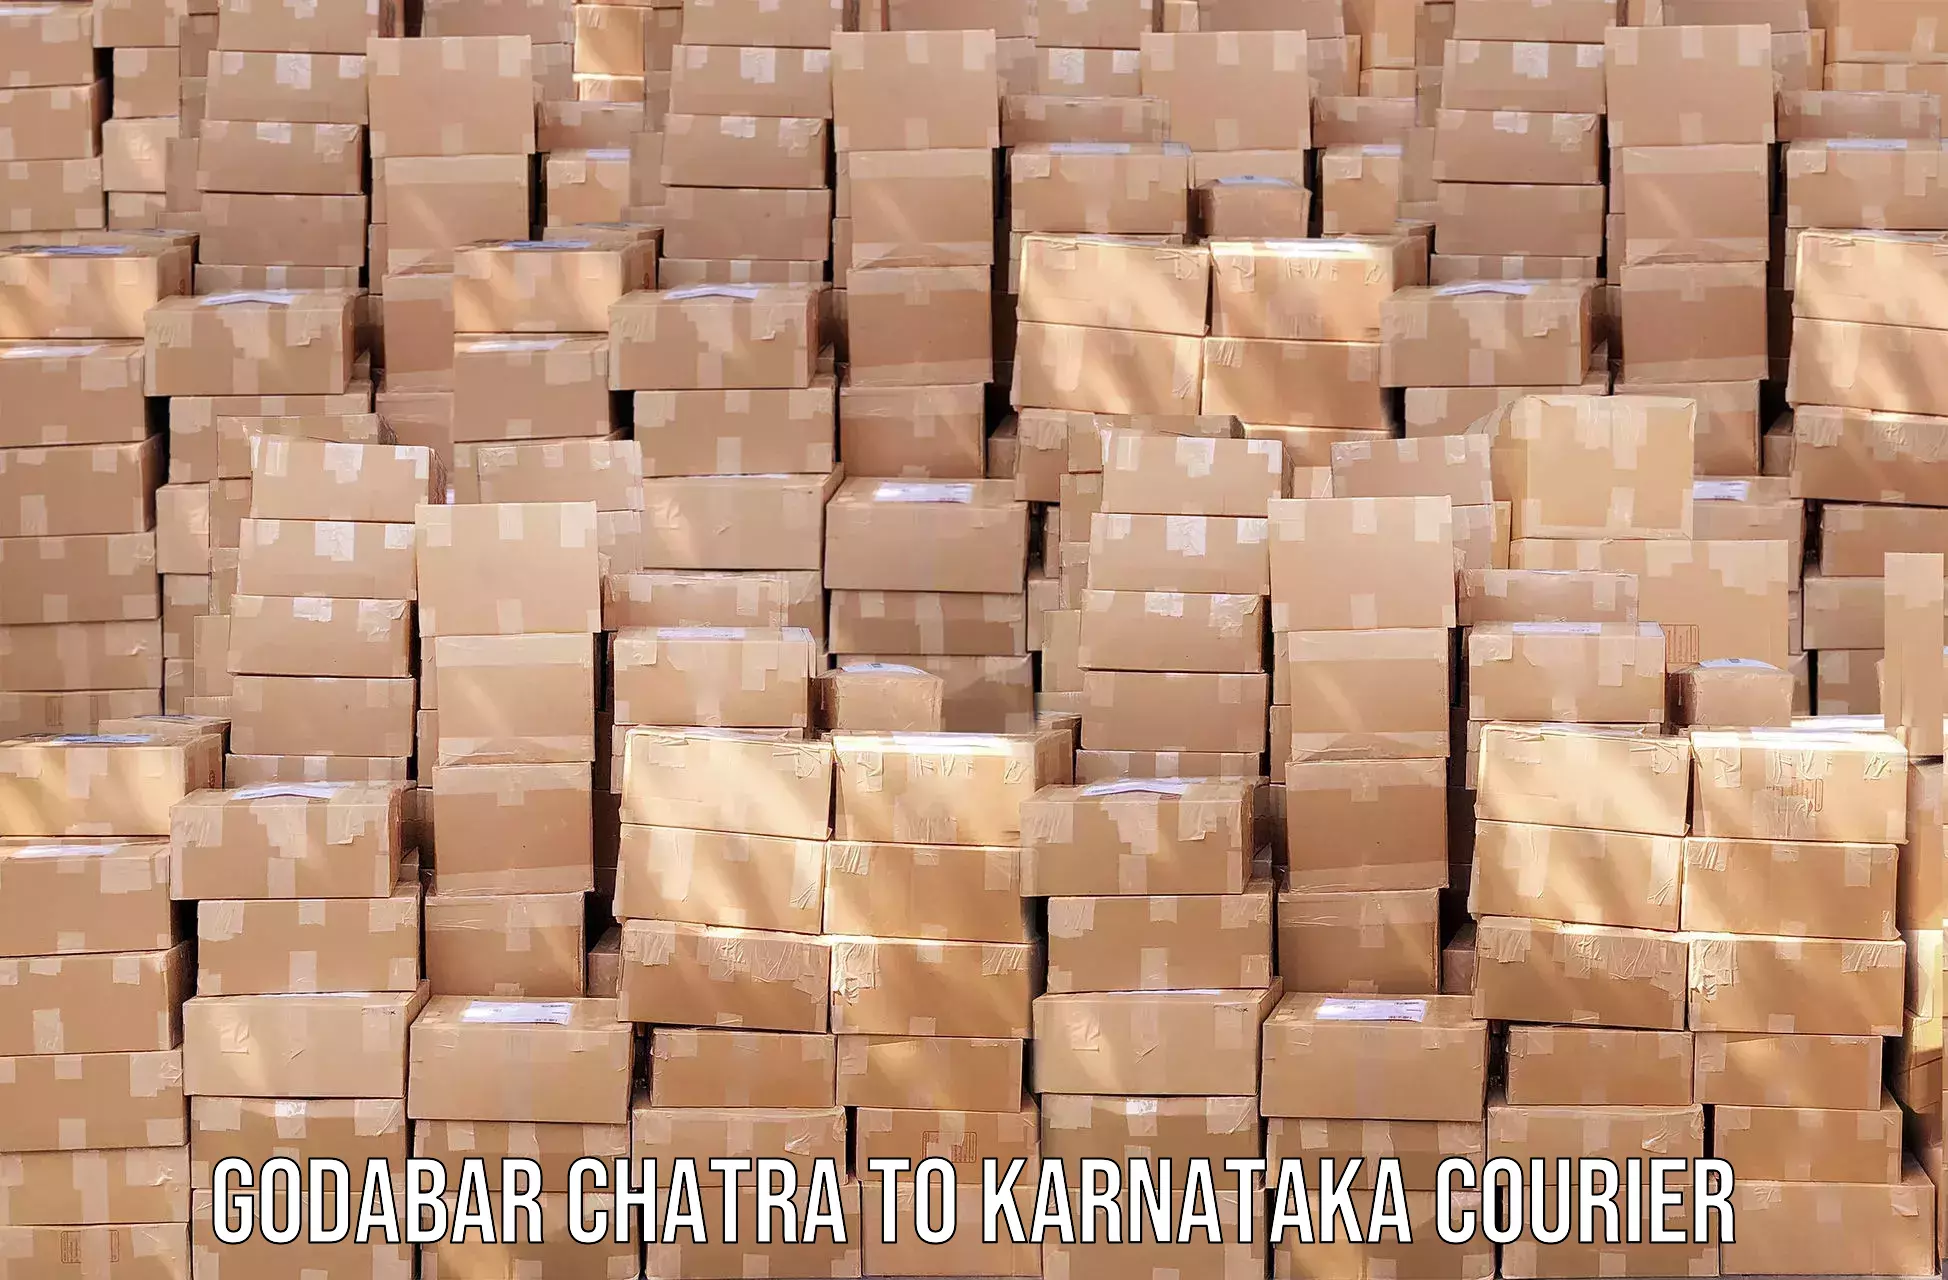 Personal parcel delivery in Godabar Chatra to Hagaribommanahalli